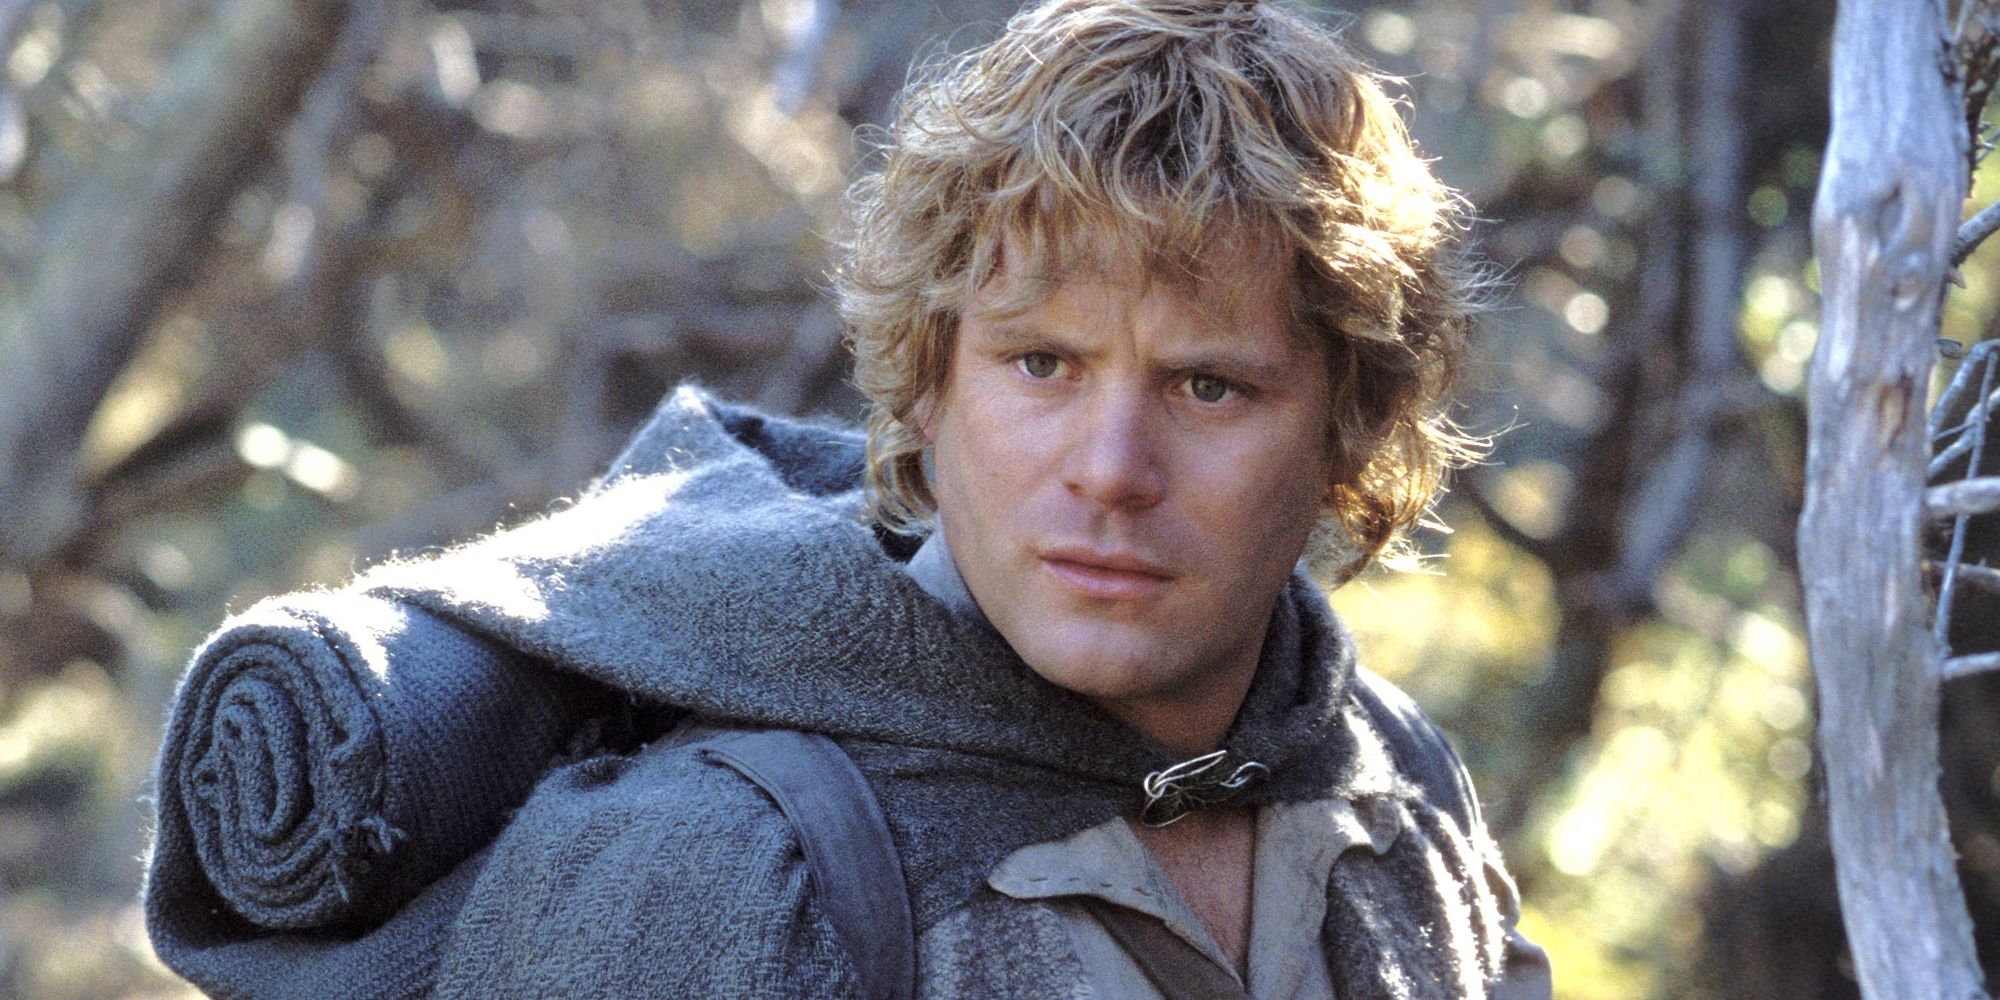 Sean Astin staring as Sam Gamgee Lord of the Rings